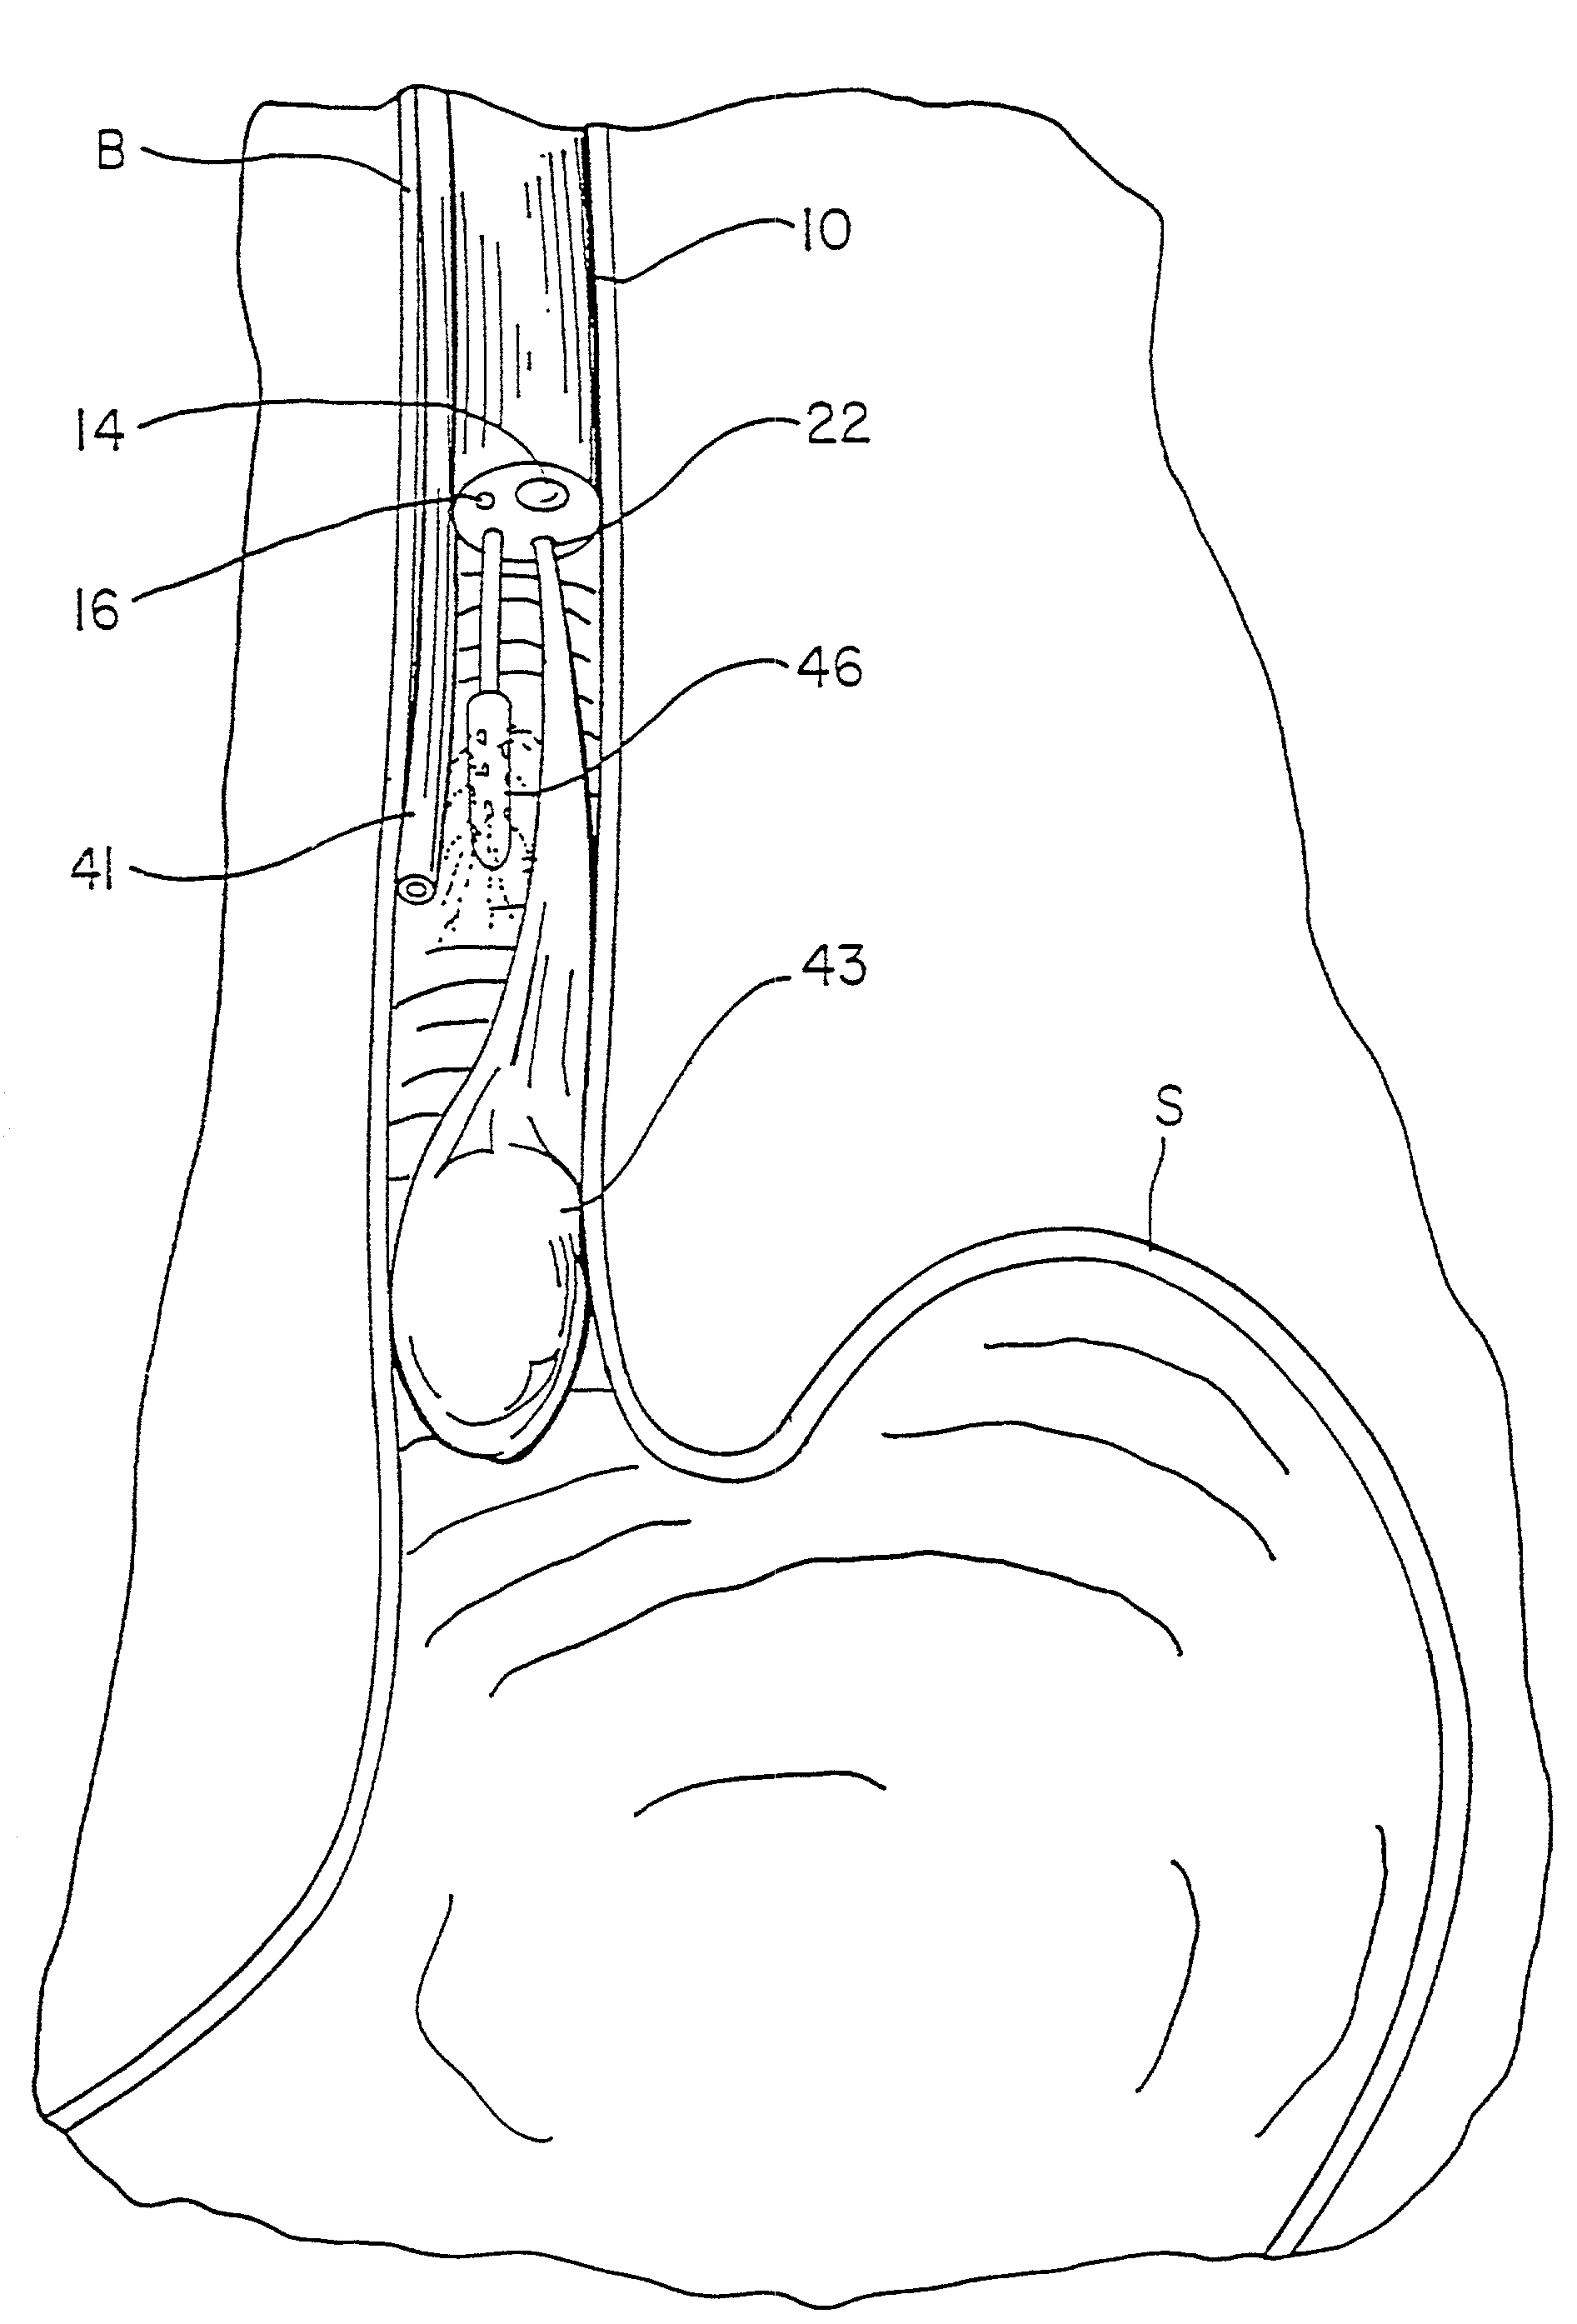 Method and apparatus for cryogenic spray ablation of gastrointestinal mucosa